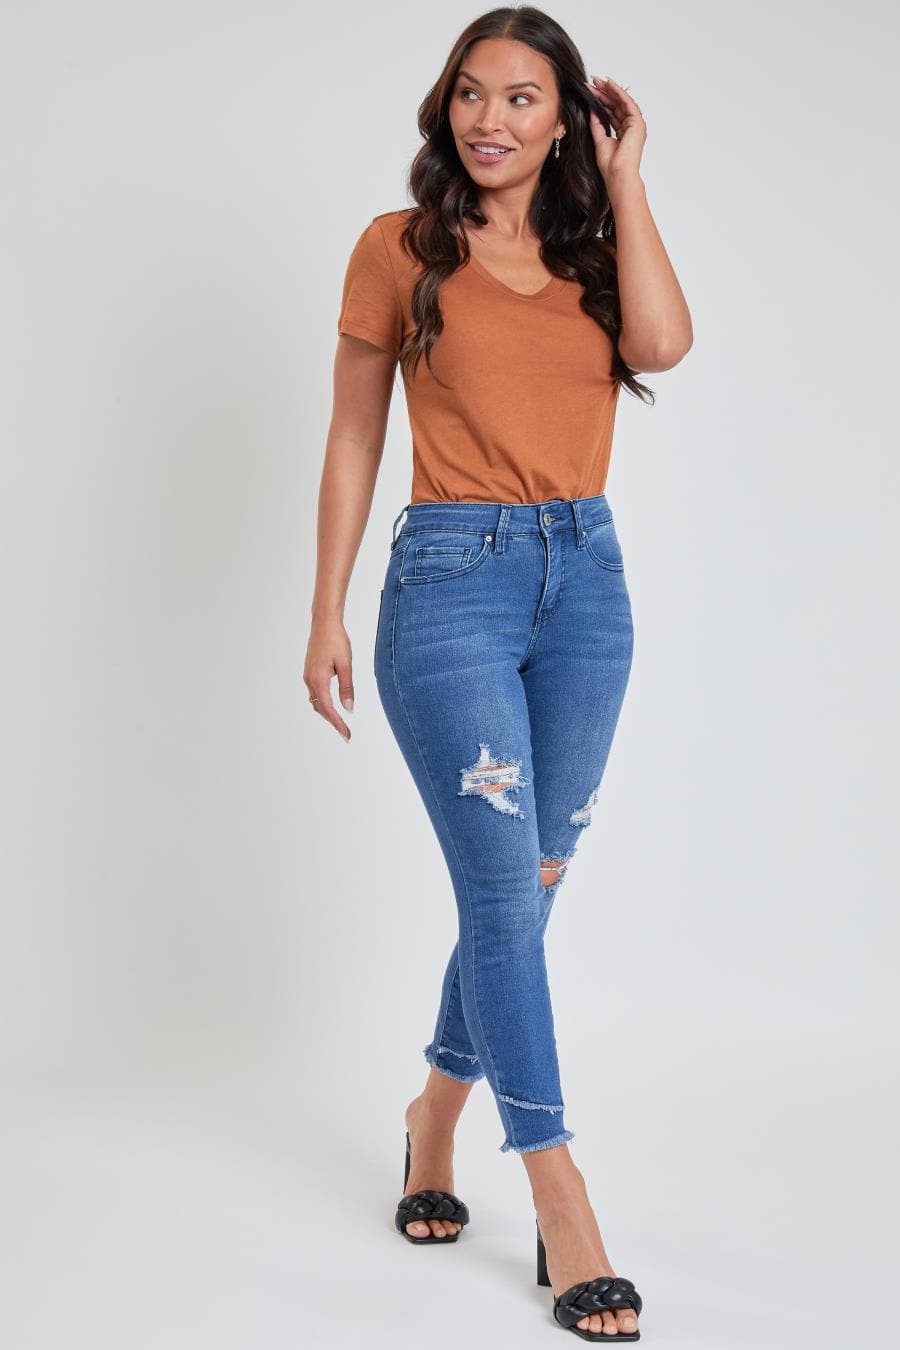 Women's Petite Jeans - Women's Petite Clothing – Royalty For me